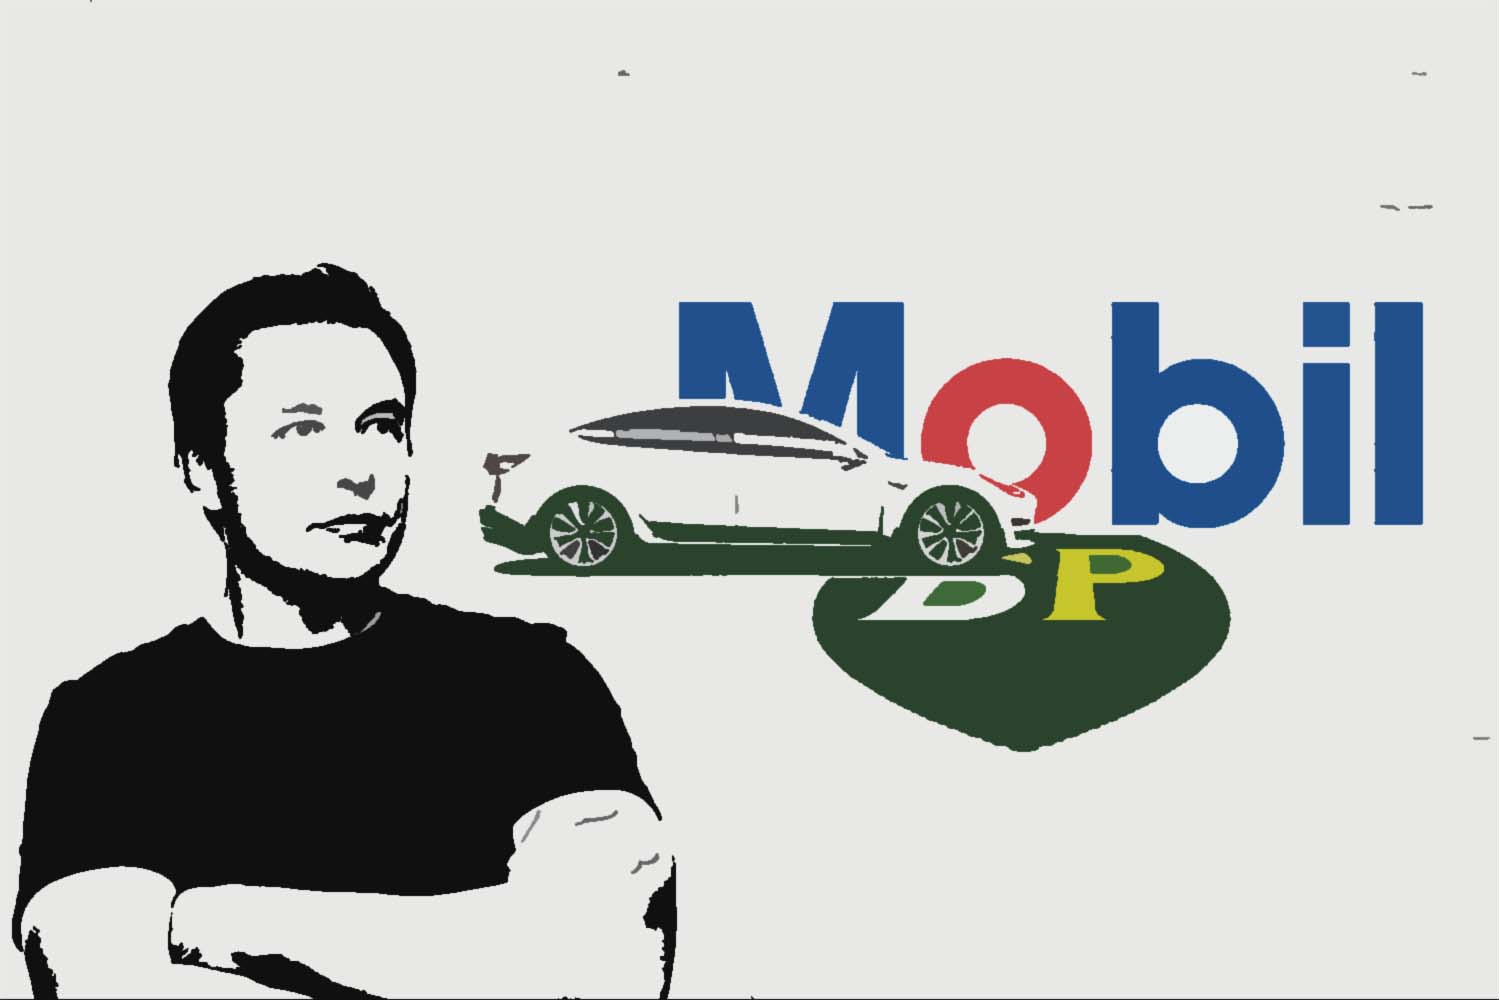 ELON MUSK AND TESLA WANT OT HELP BP AND MOBIL